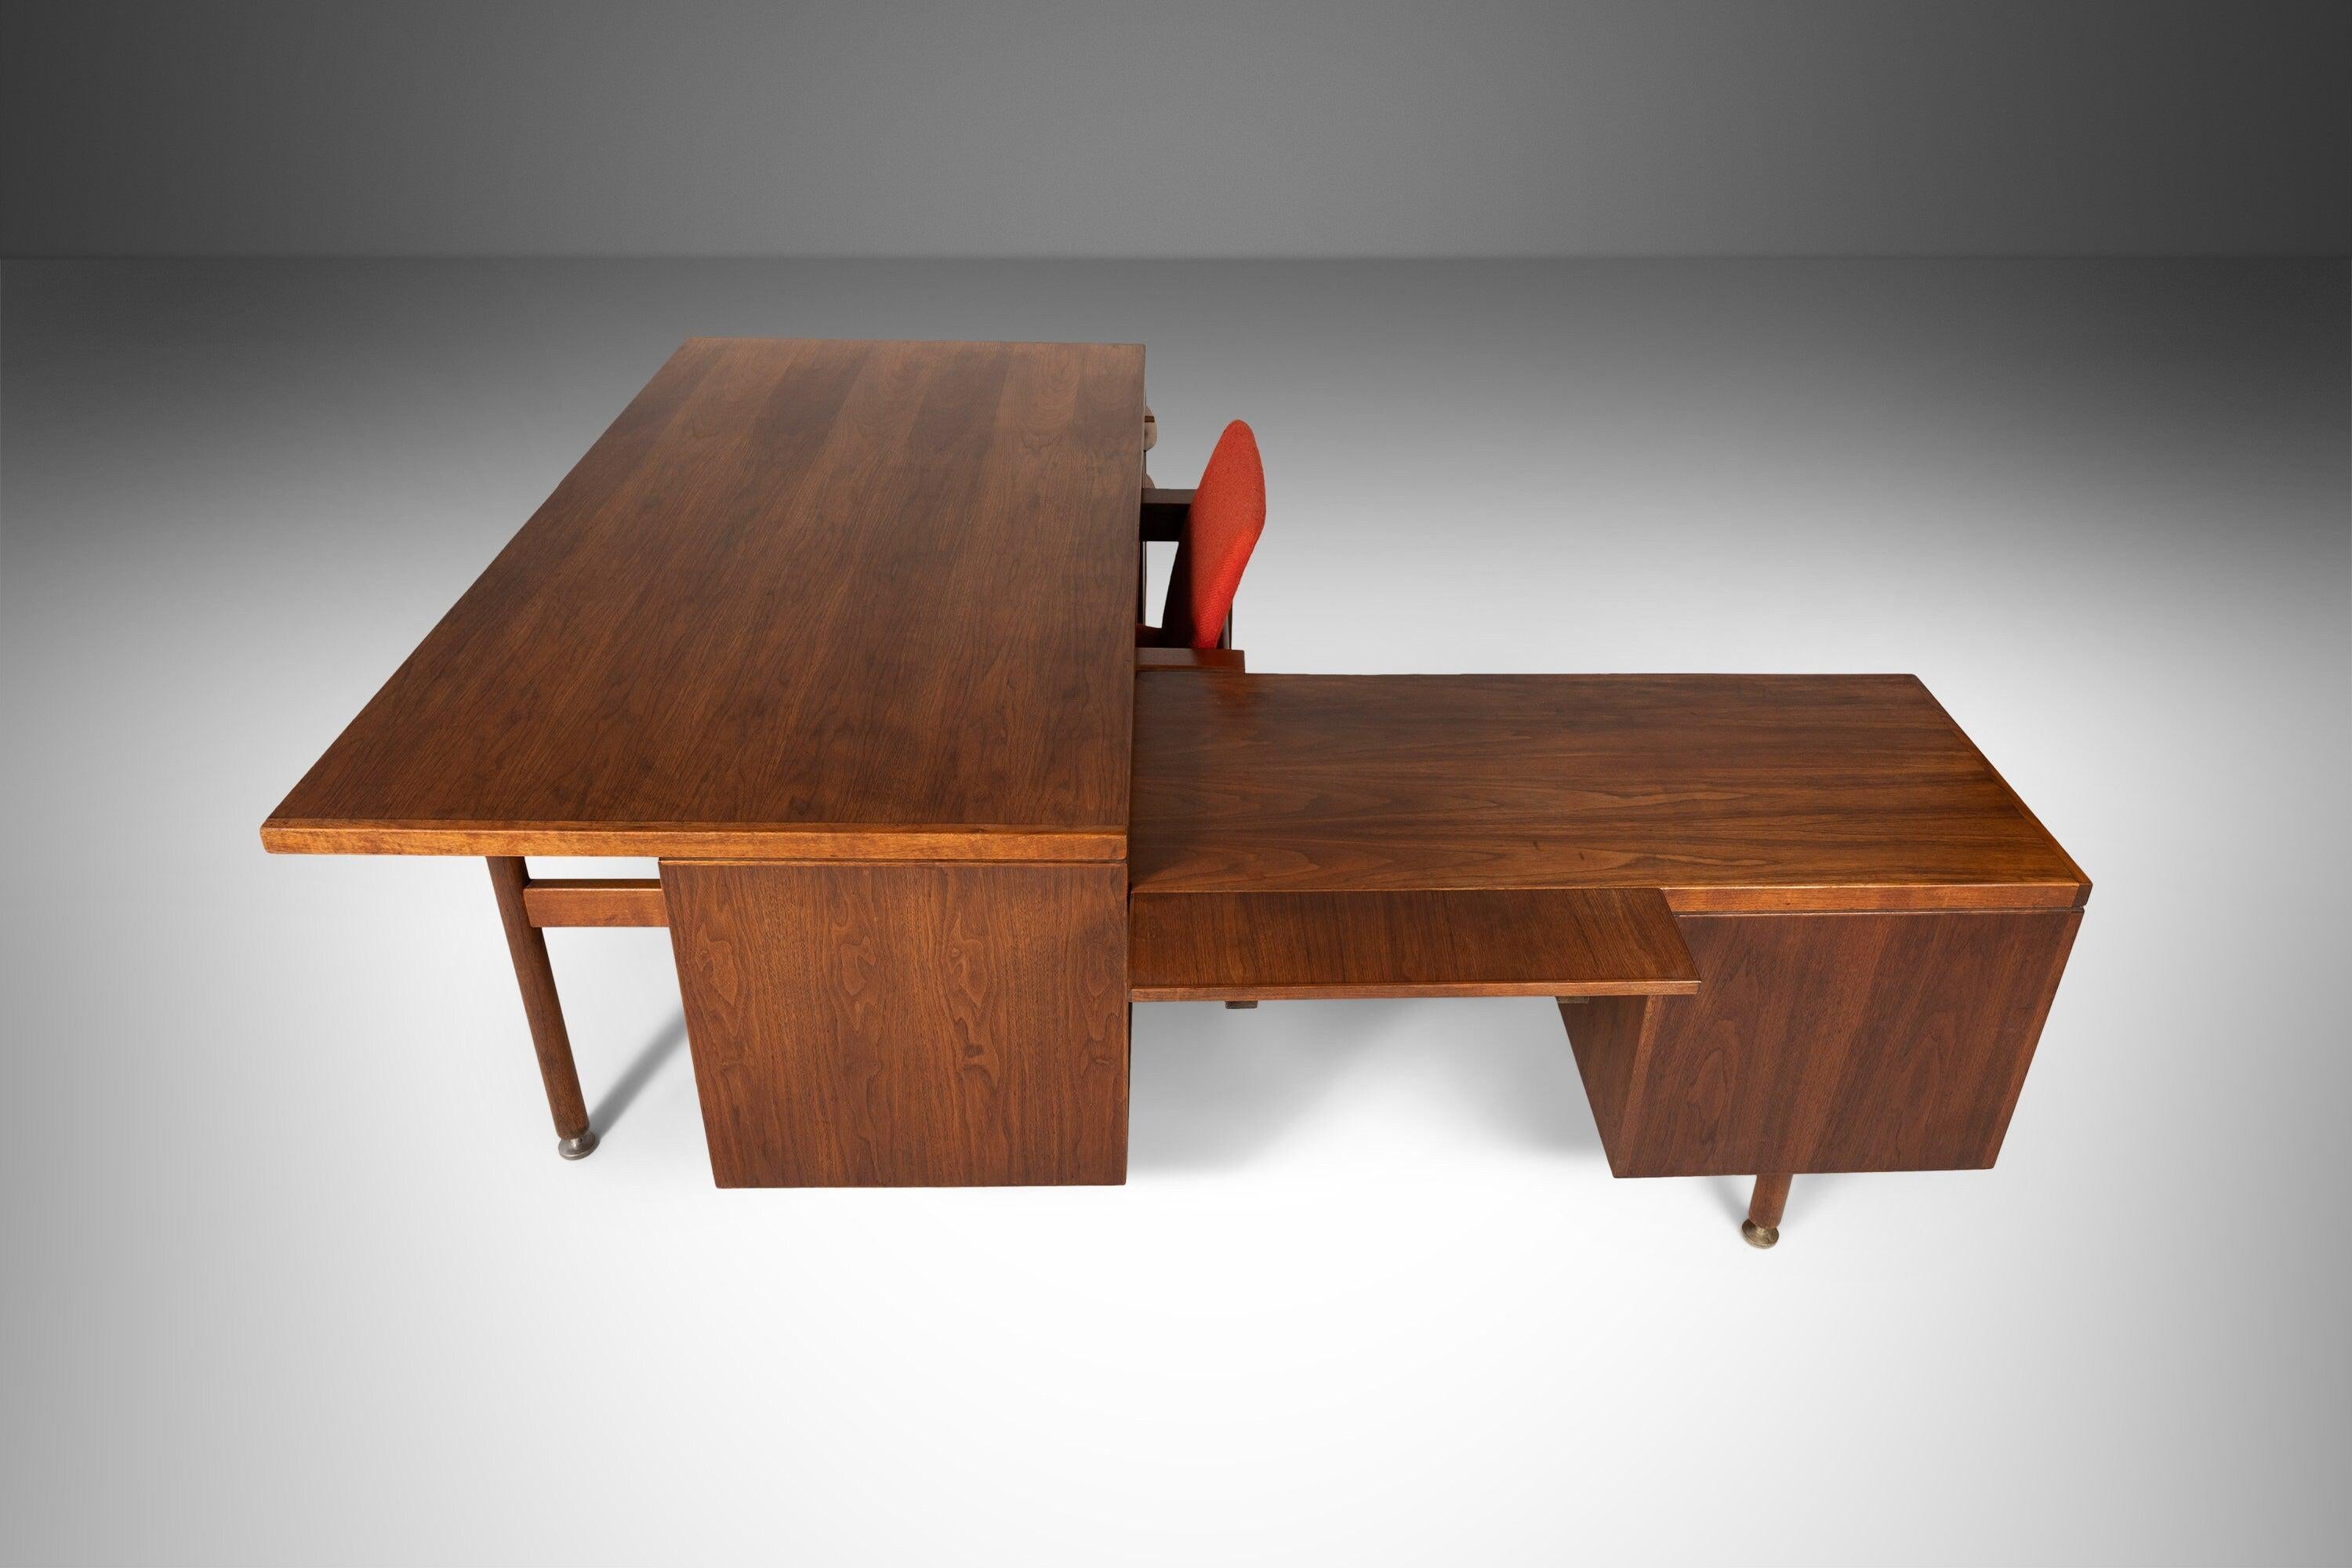 In a wide range of vintage office collections, Jens Risom’s signature workmanship and superior modern design from the mid-century era has made him one of the most popular designers in the United States. With excellent craftsmanship and attention to